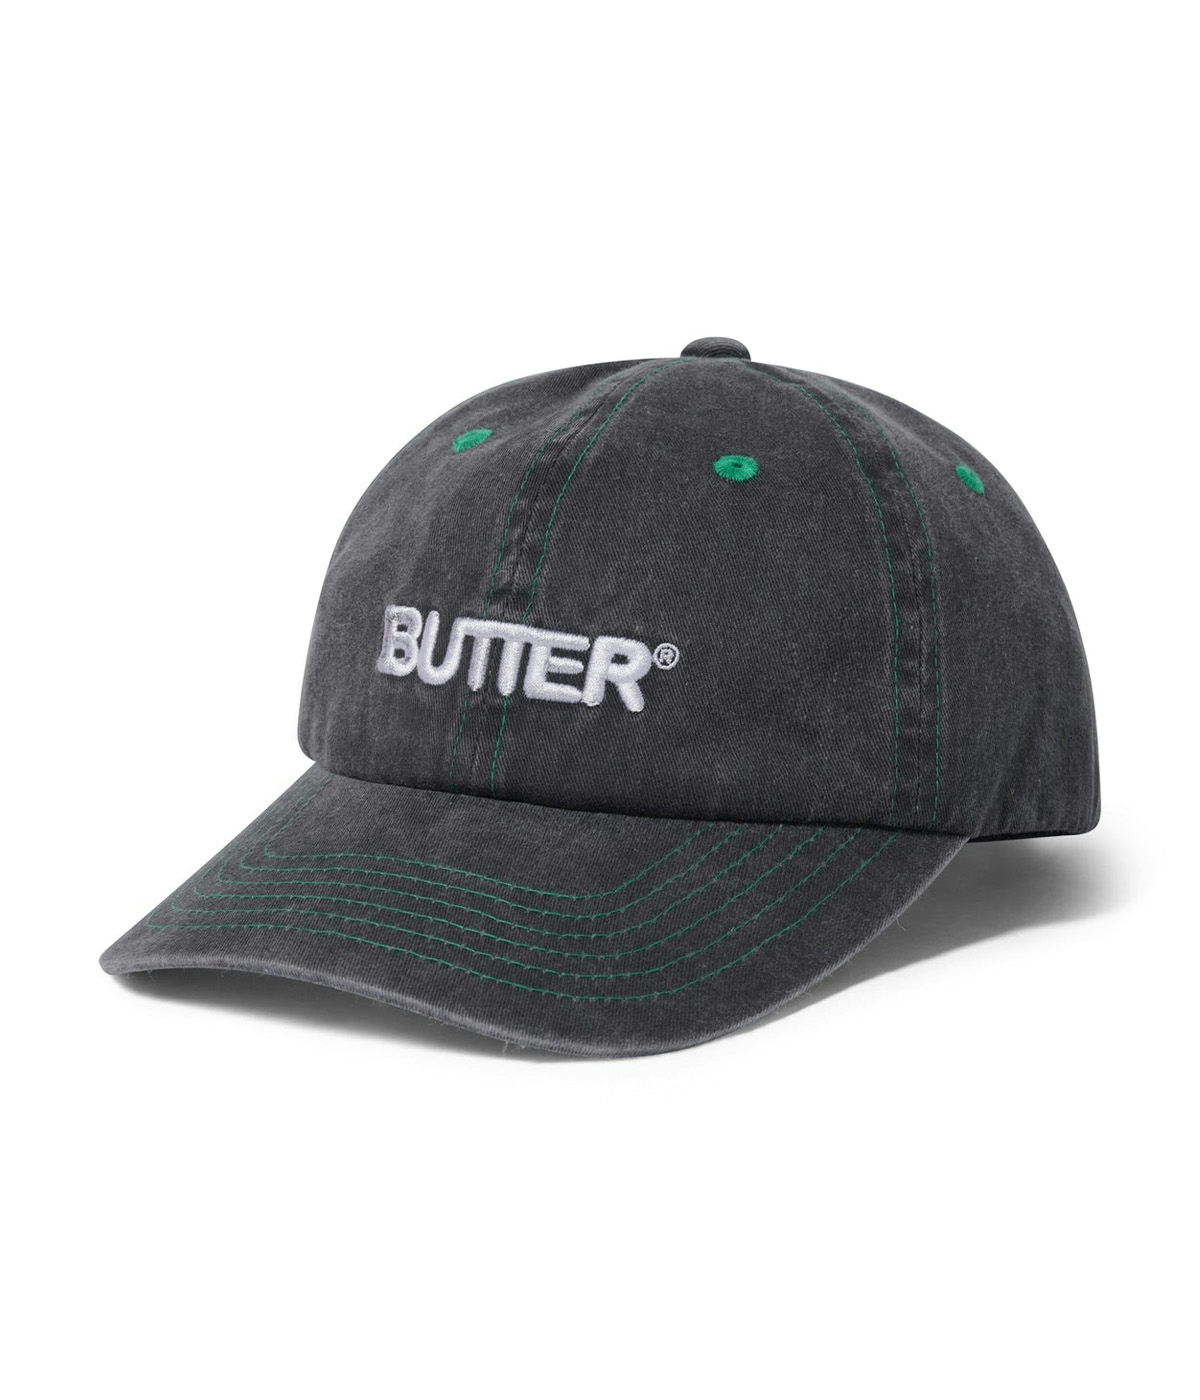 Butter Goods Rounded Logo 6 Panel Cap Washed Black 1